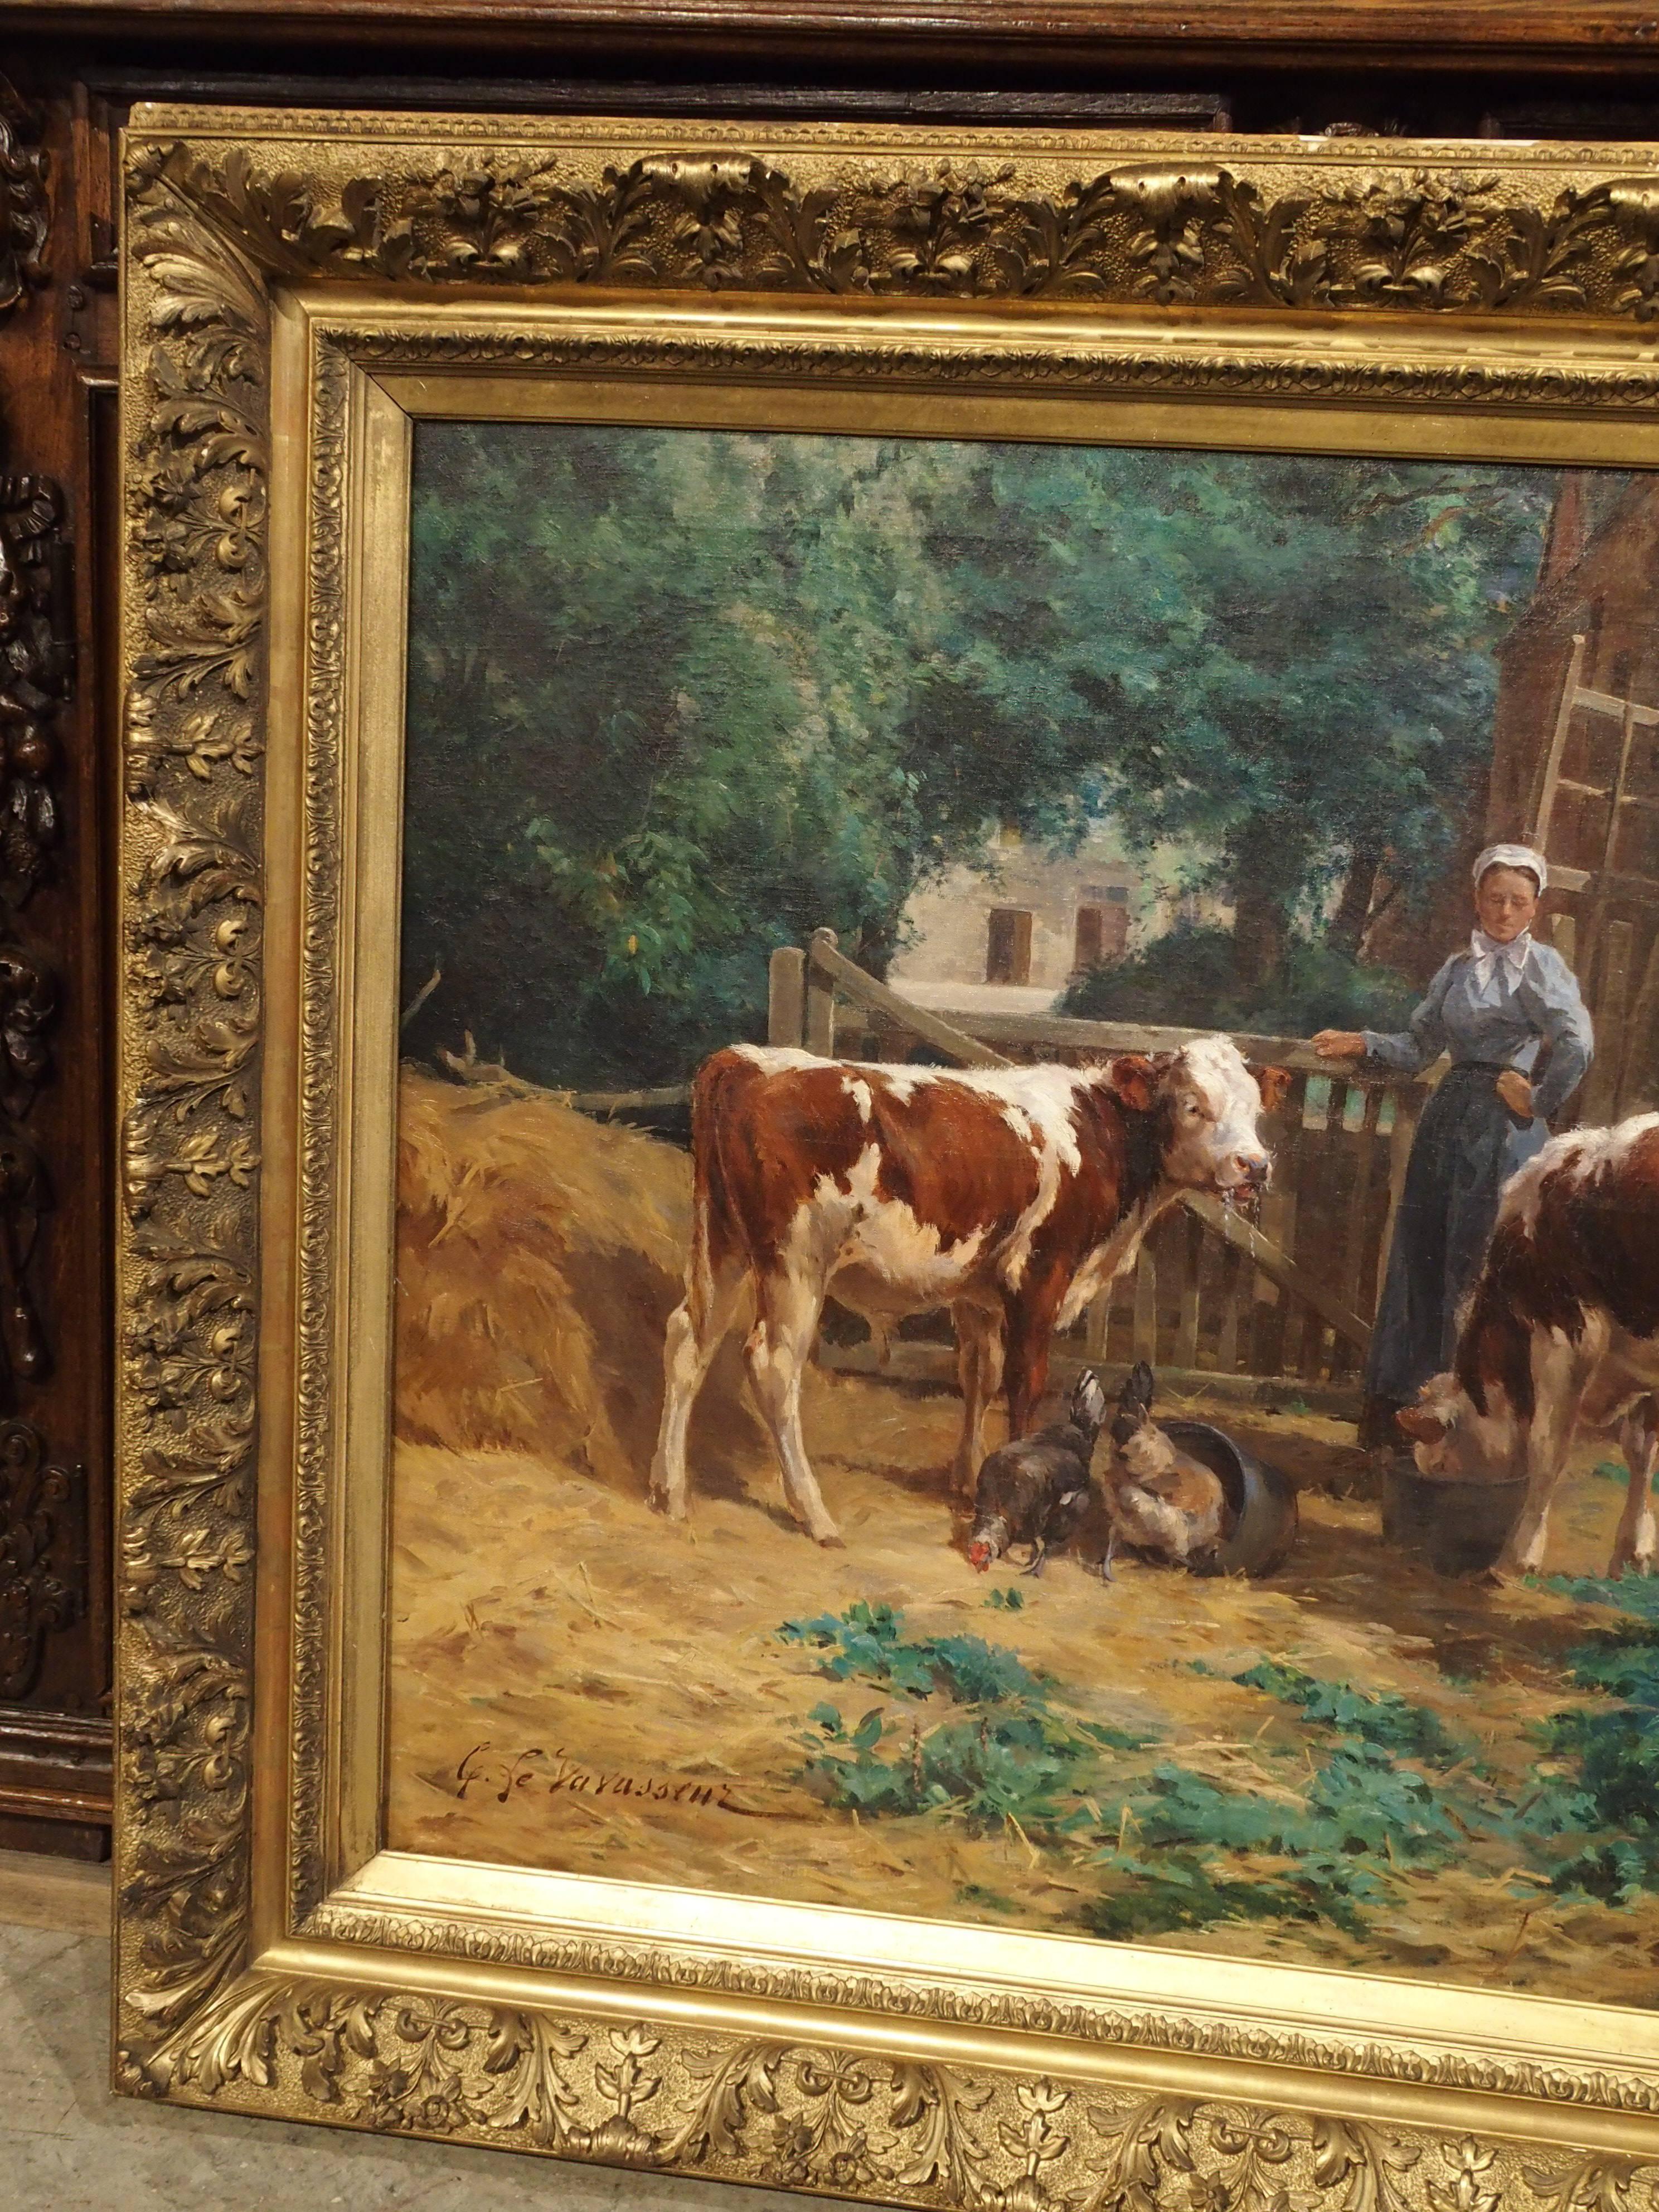 Cyprien Le Vavasseuer (1866-1924)

This oil on canvas depicts a peaceful, sunny, summer afternoon with cows and roosters at feeding time. There is a female caretaker in attendance within the enclosed area of the barnyard, and the ground is strewn